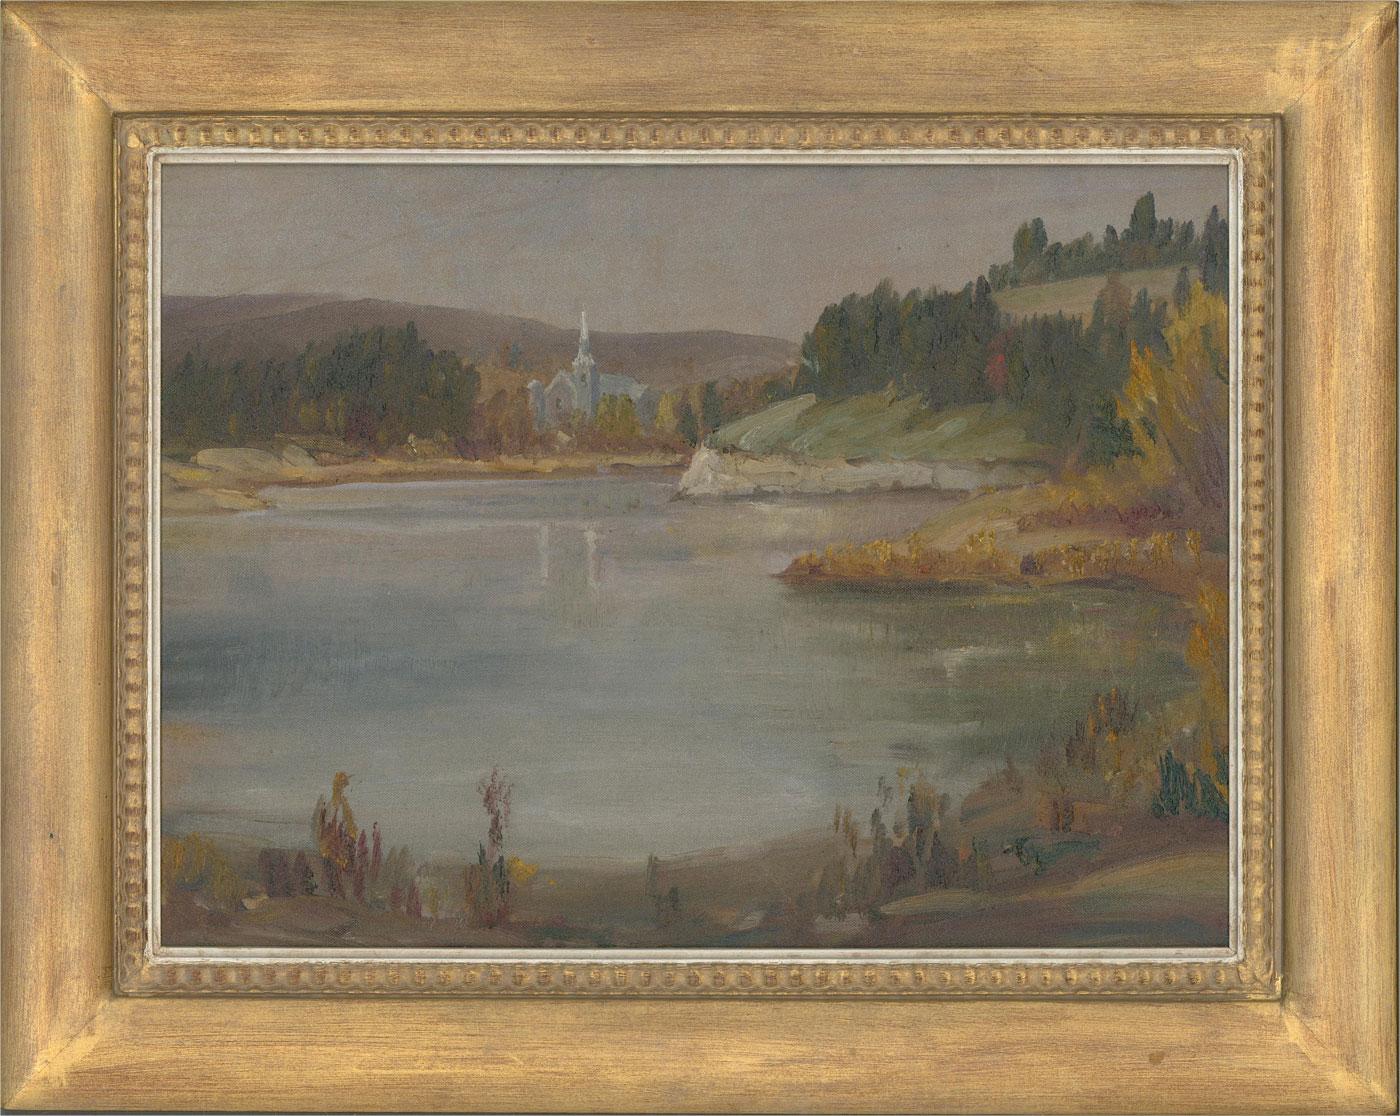 Unknown Landscape Painting - 20th Century Oil - River View with Church